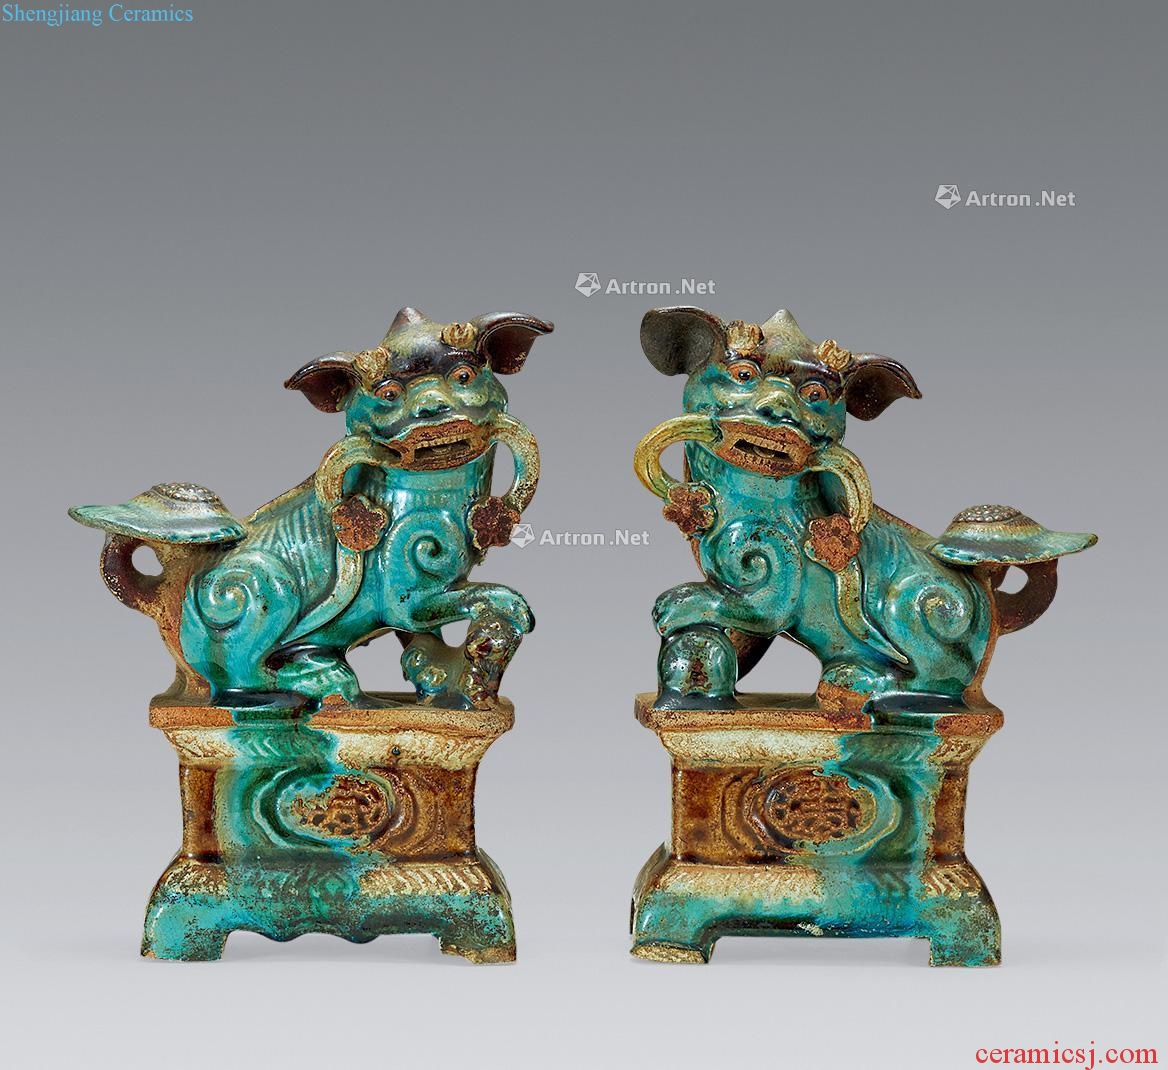 Method of China in Ming dynasty porcelain lions (a)